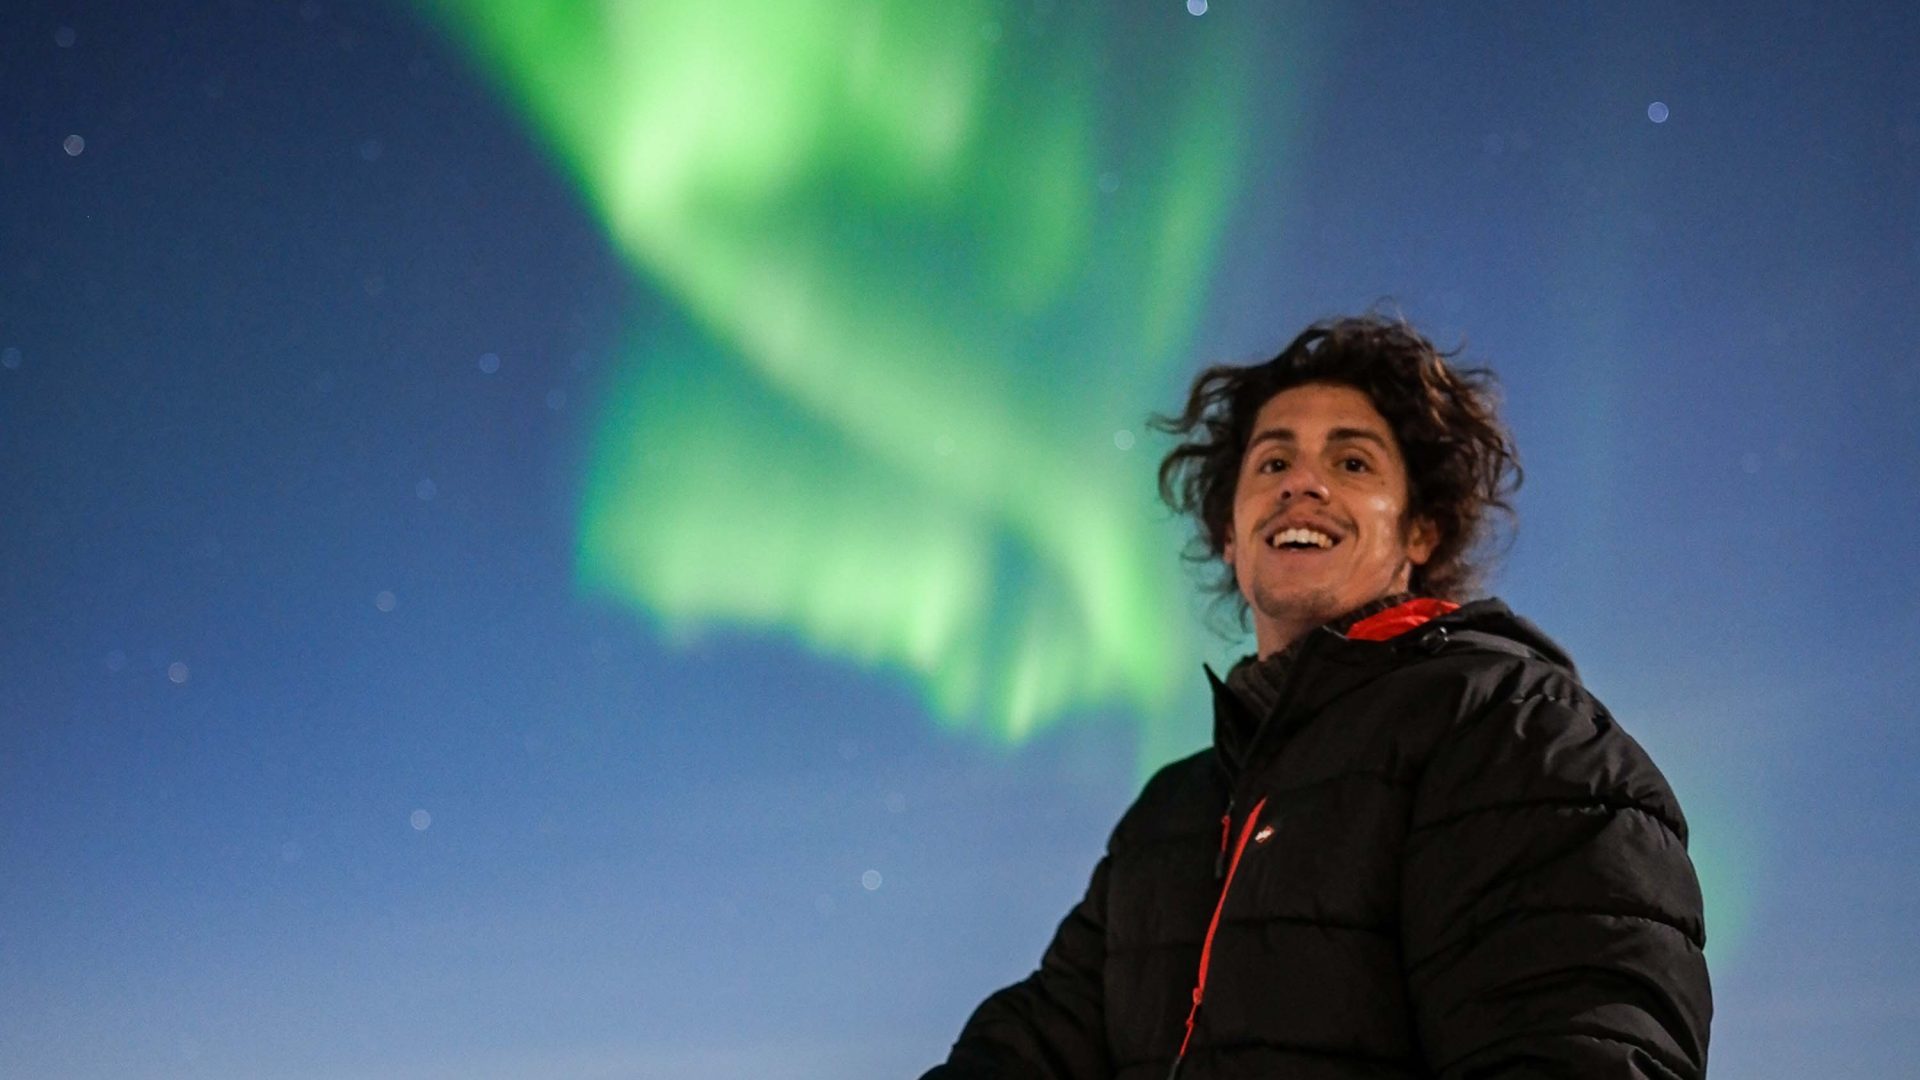 Meet the aurora hunter who drives for hours and miles to see the northern lights